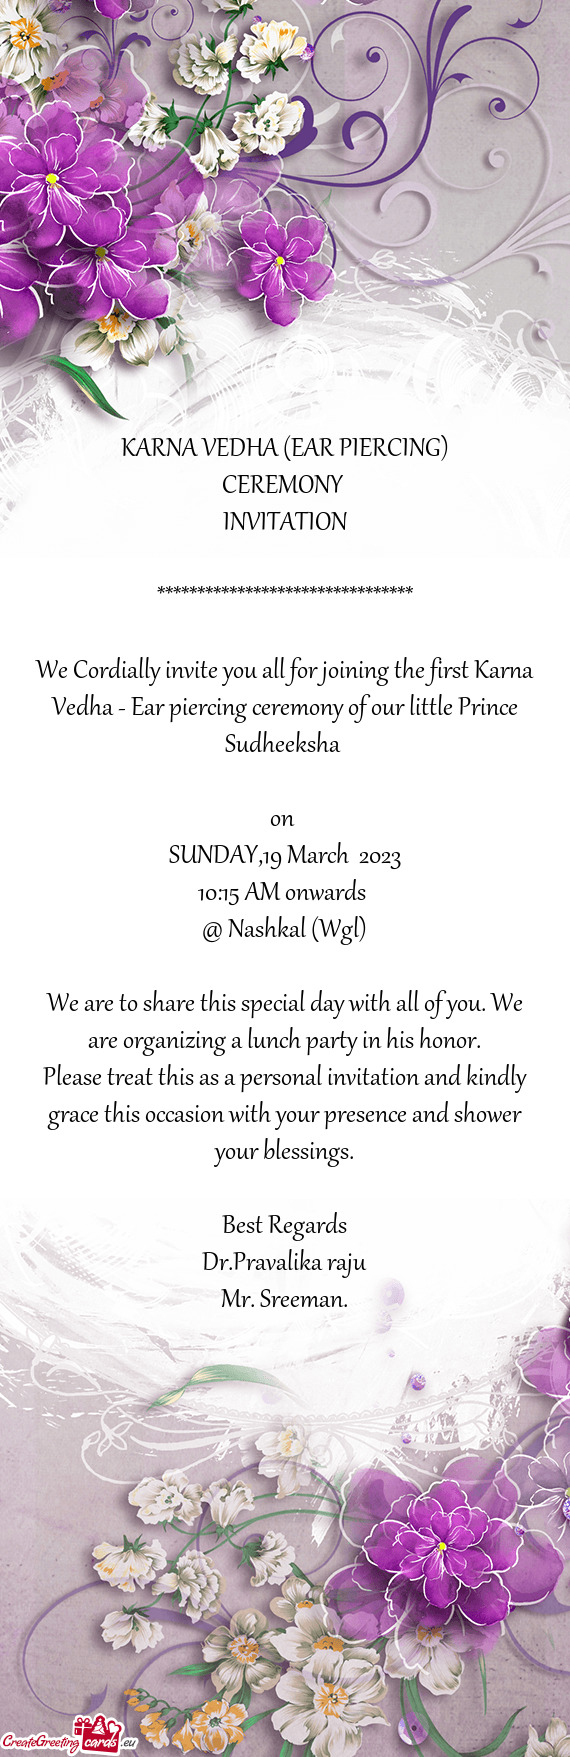 We Cordially invite you all for joining the first Karna Vedha - Ear piercing ceremony of our little